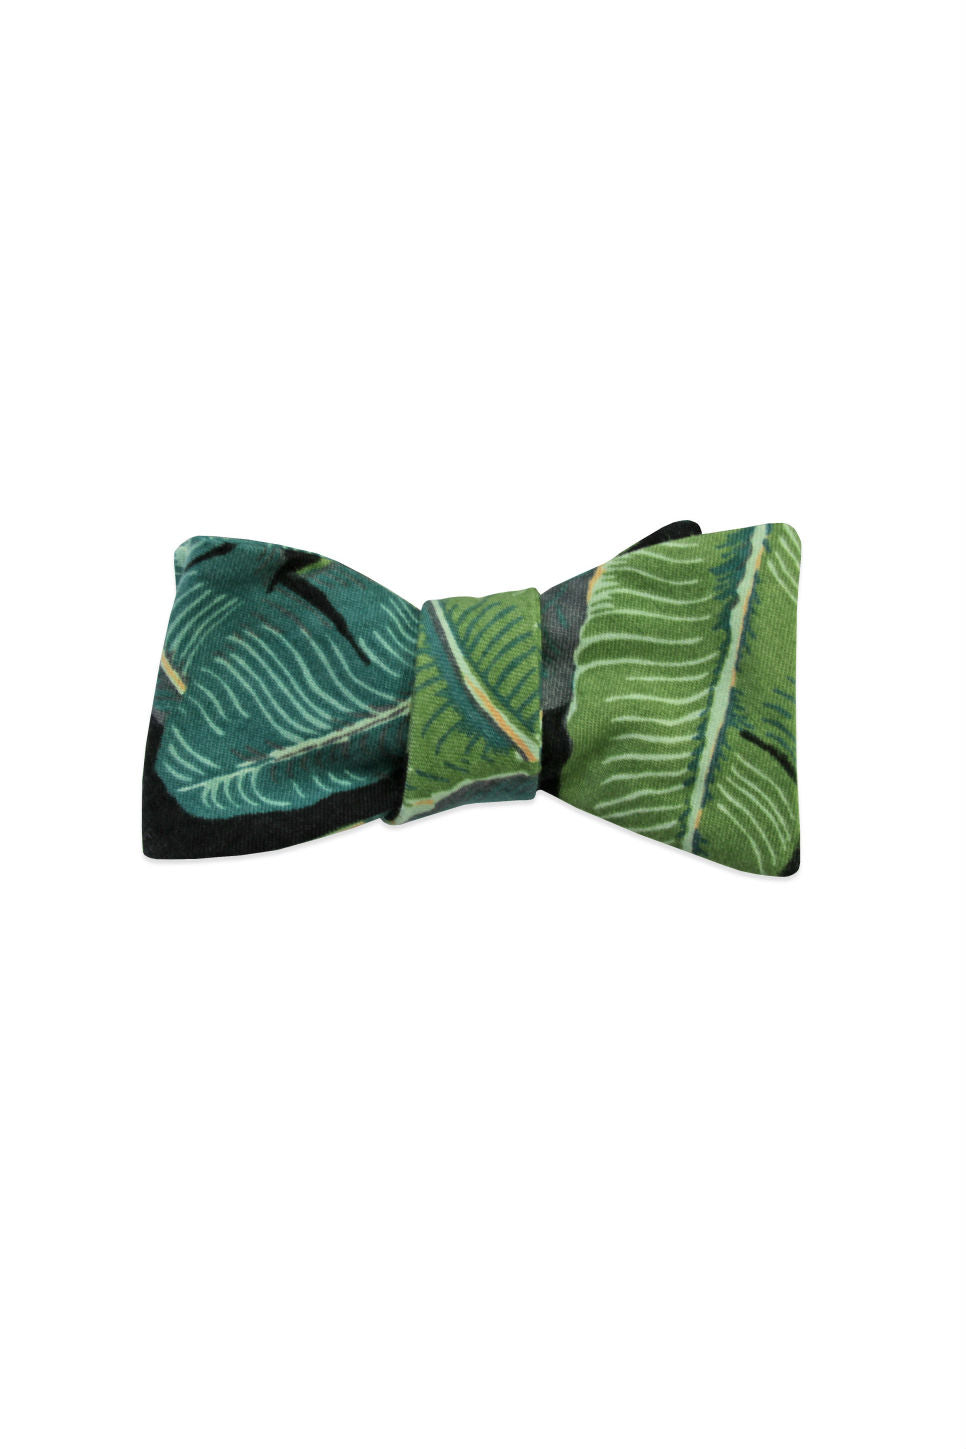 Pocket Square Clothing - The Camille Bow Tie - Tropical Print